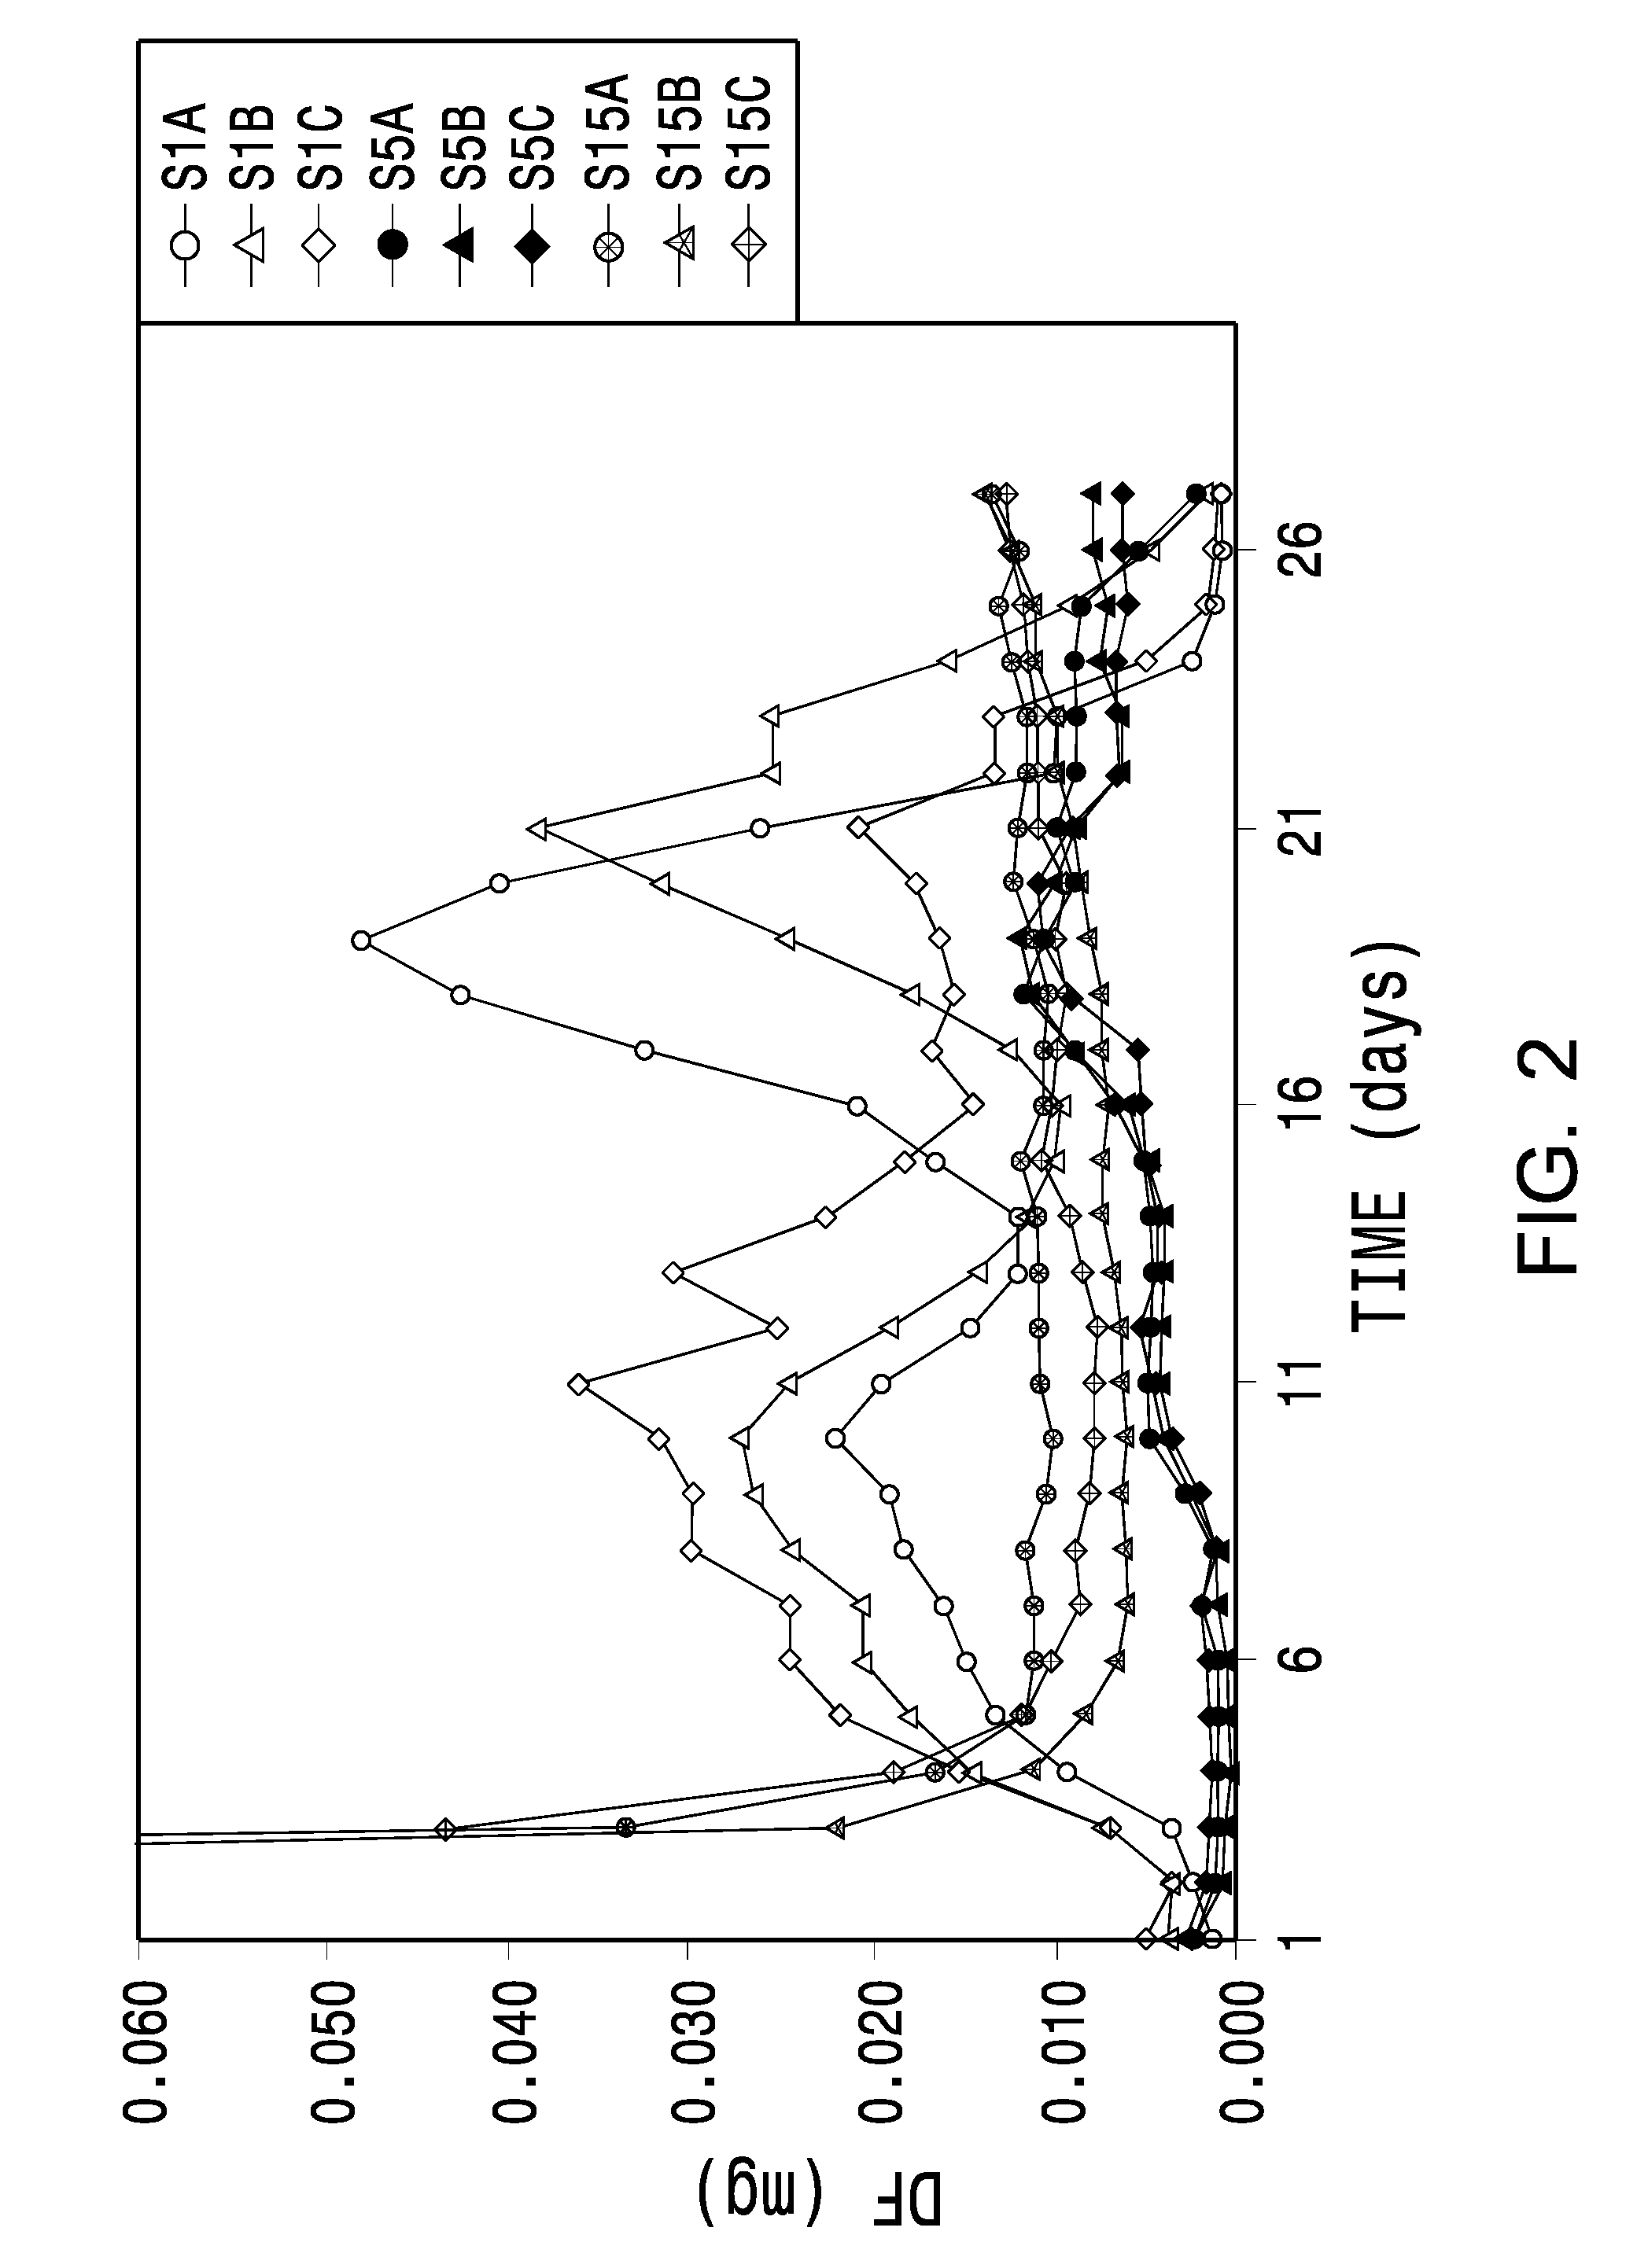 Ocular biodegradable drug implant and method of its use